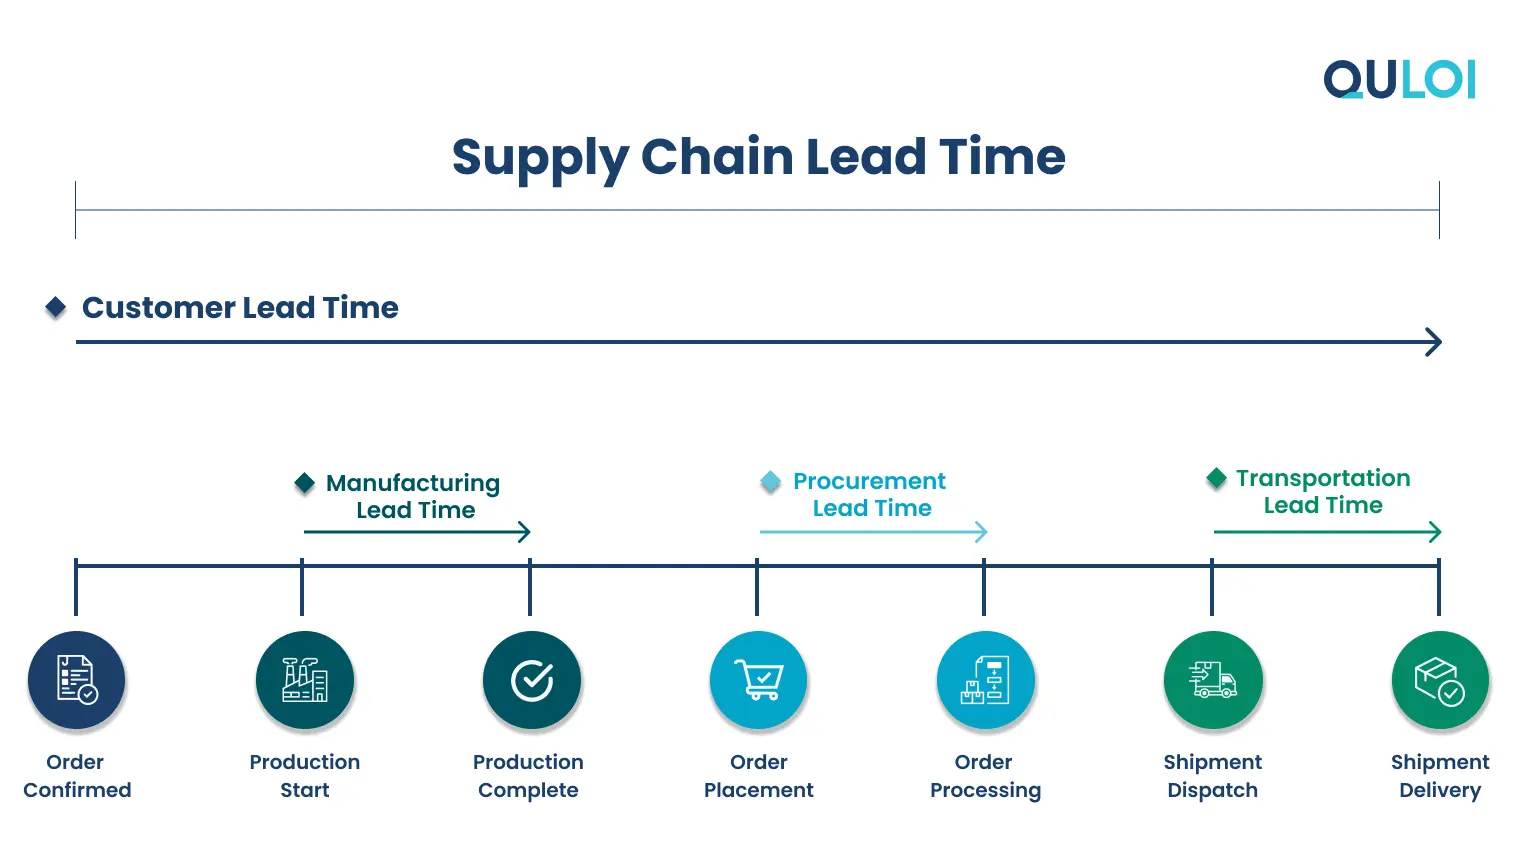 Supply Chain Lead Time